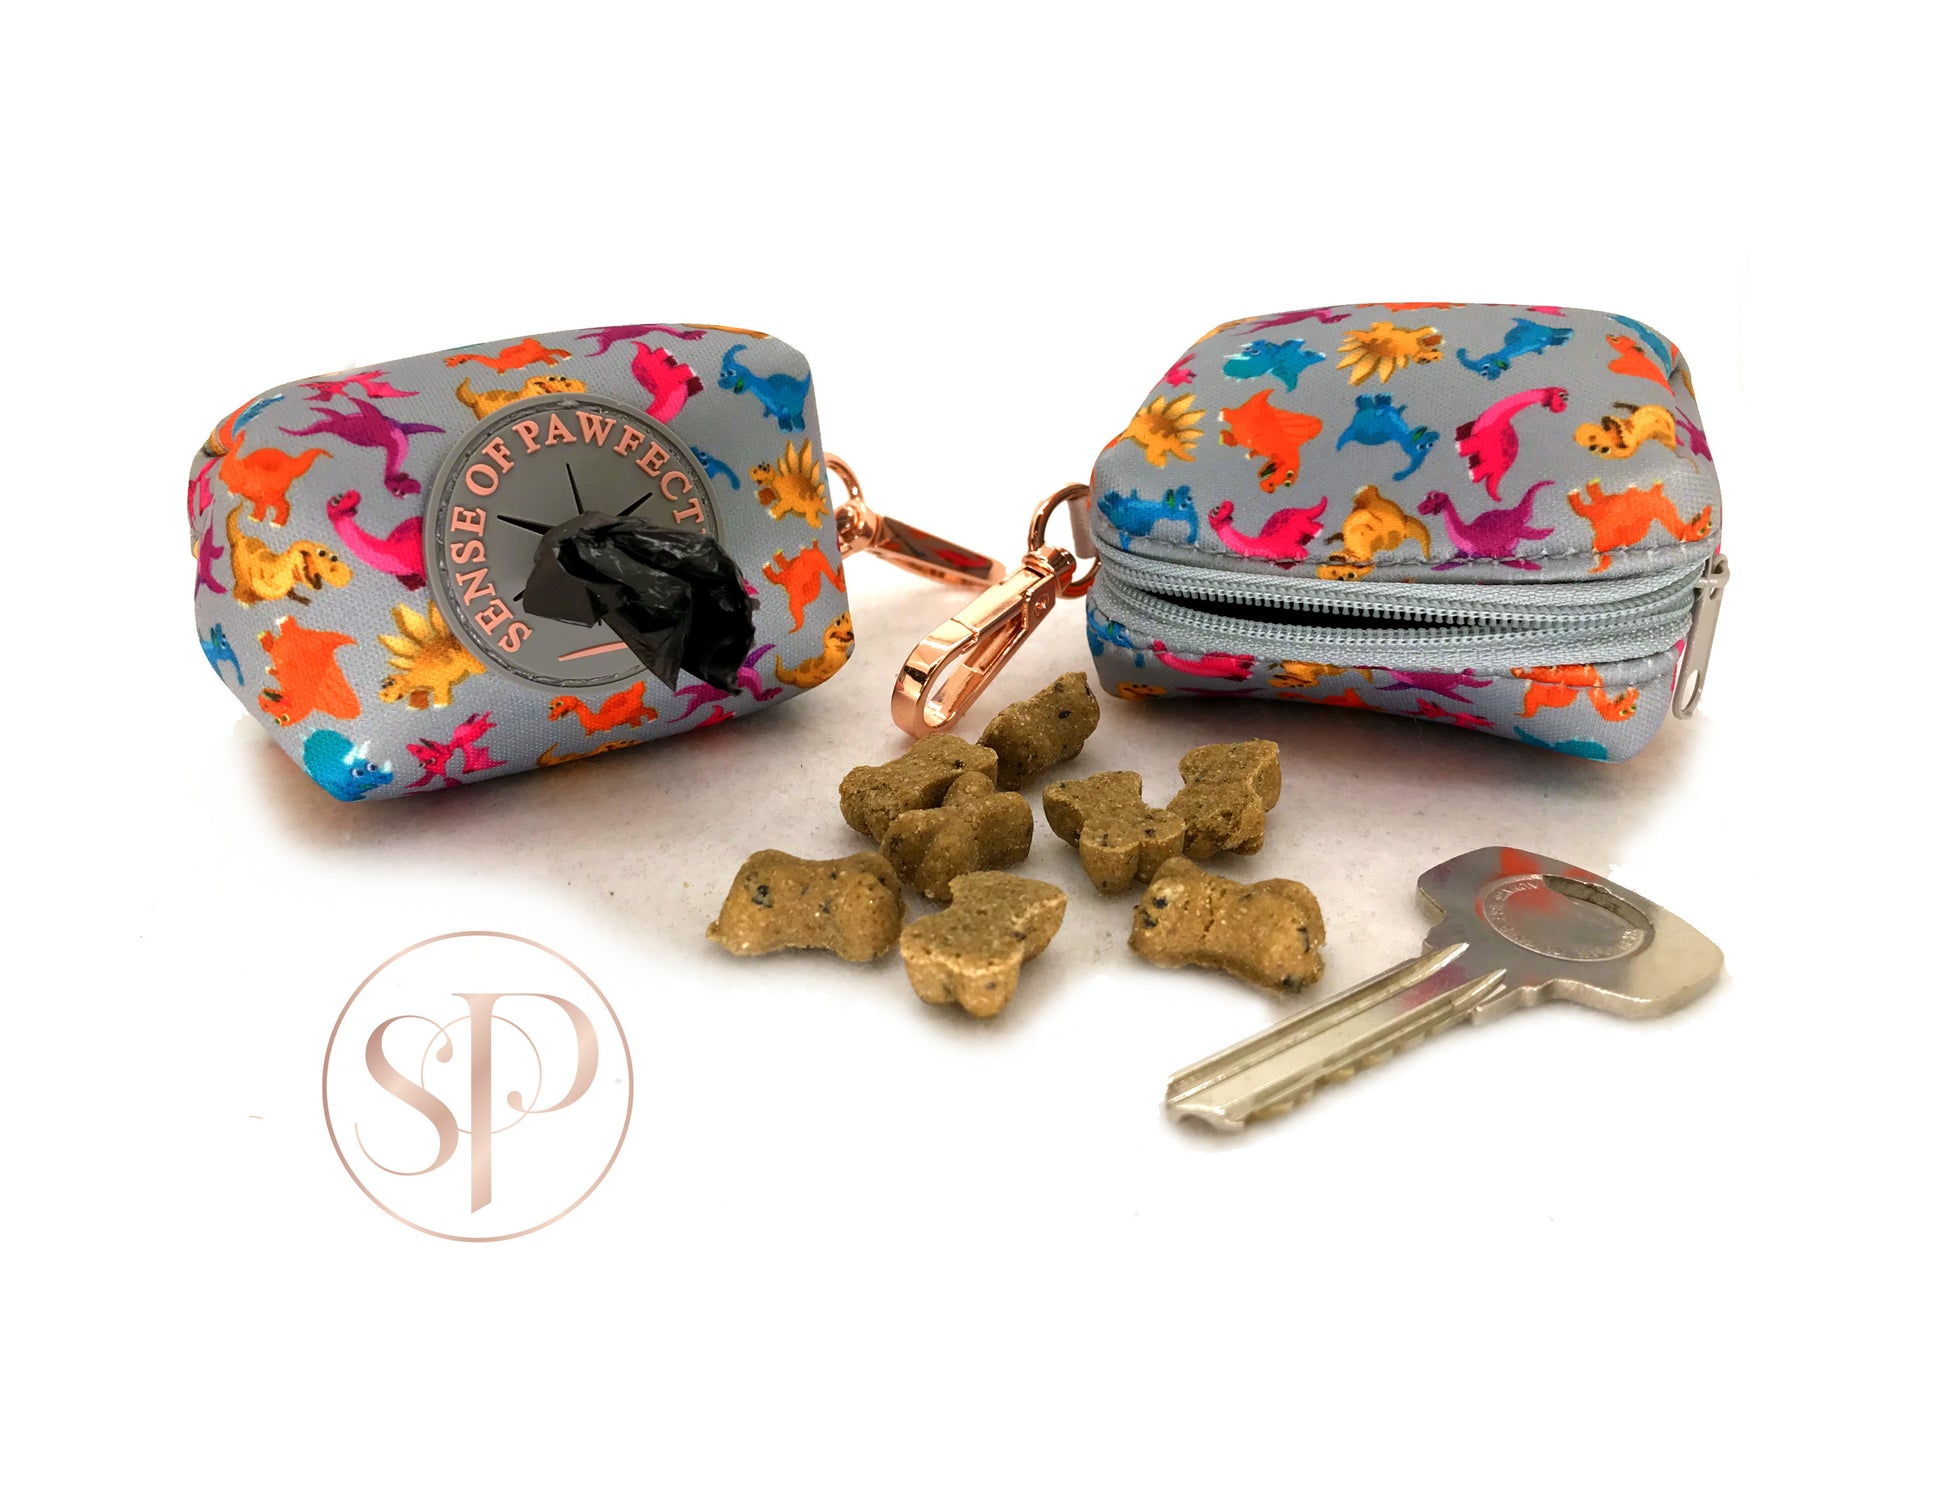 A cute little Roxi Dinosaur doggy bag that can be used as a poop bag or treat holder from the Dogasaurs Collection.